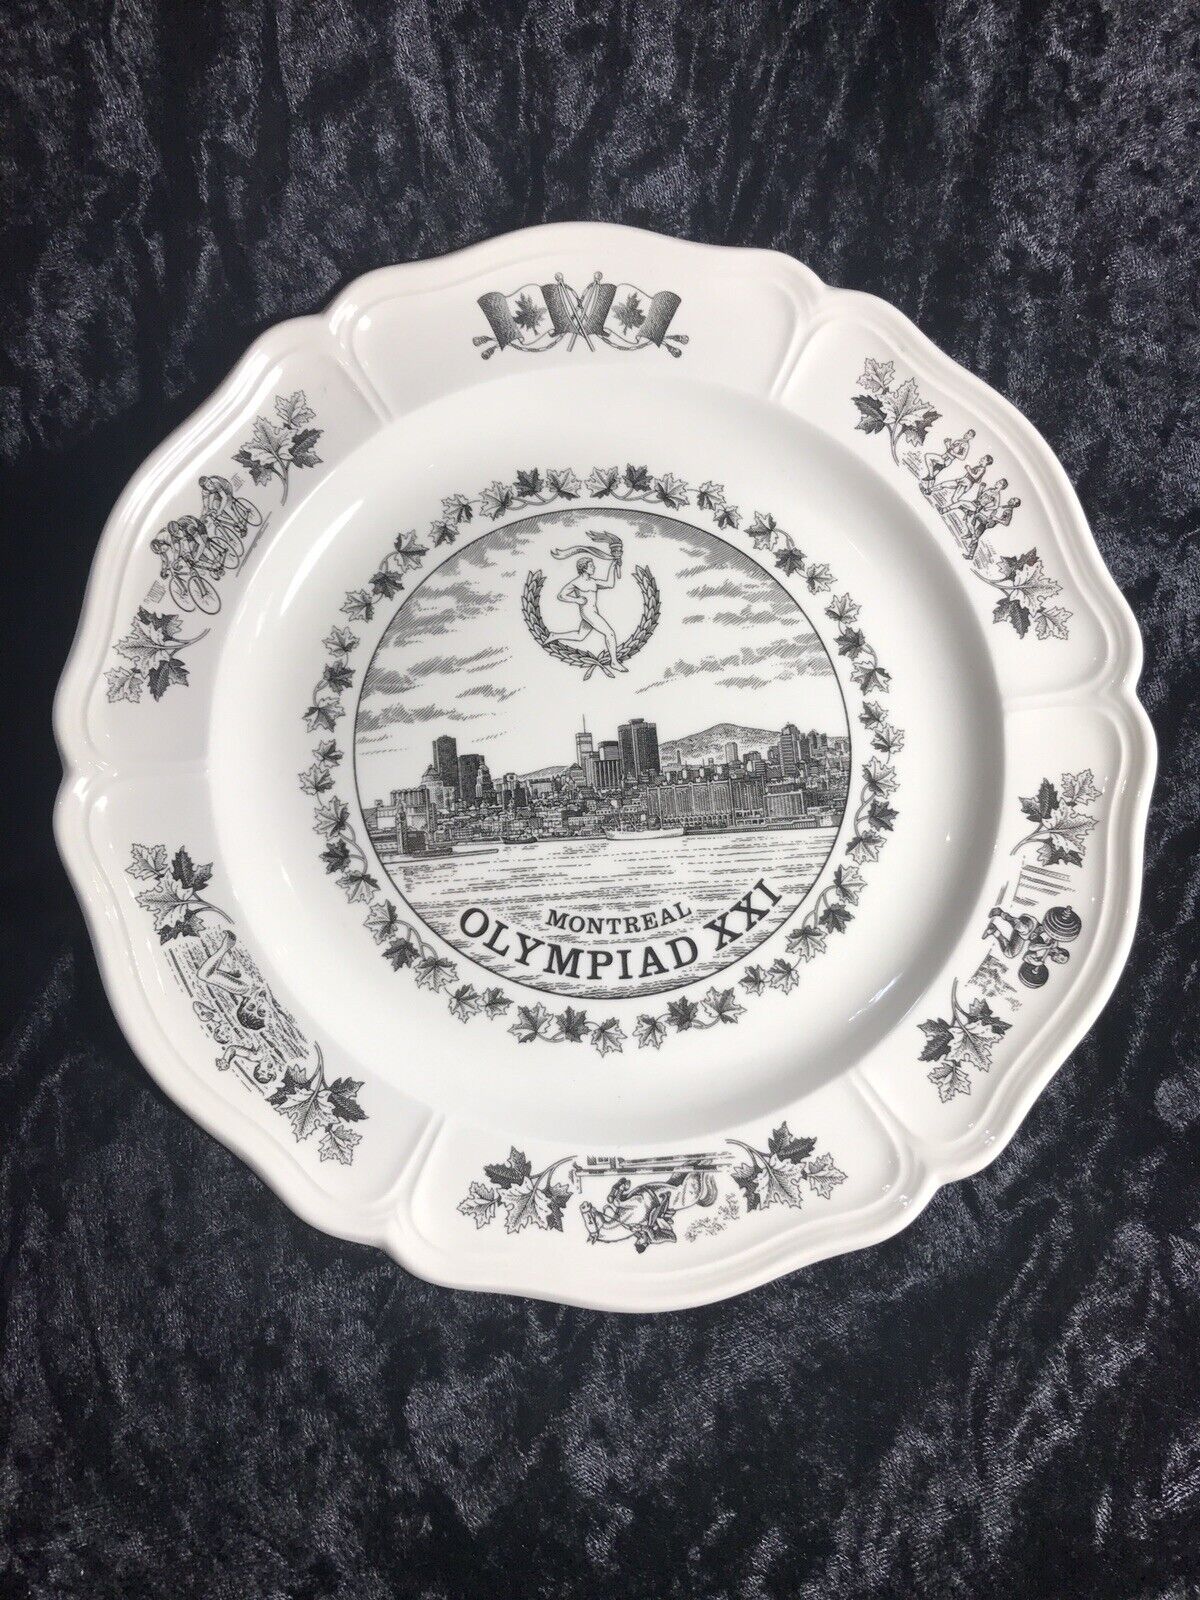 Wedgwood Collectors Plate XXI Olympiad Montreal Canada 1976 10.5” + Plate Wire